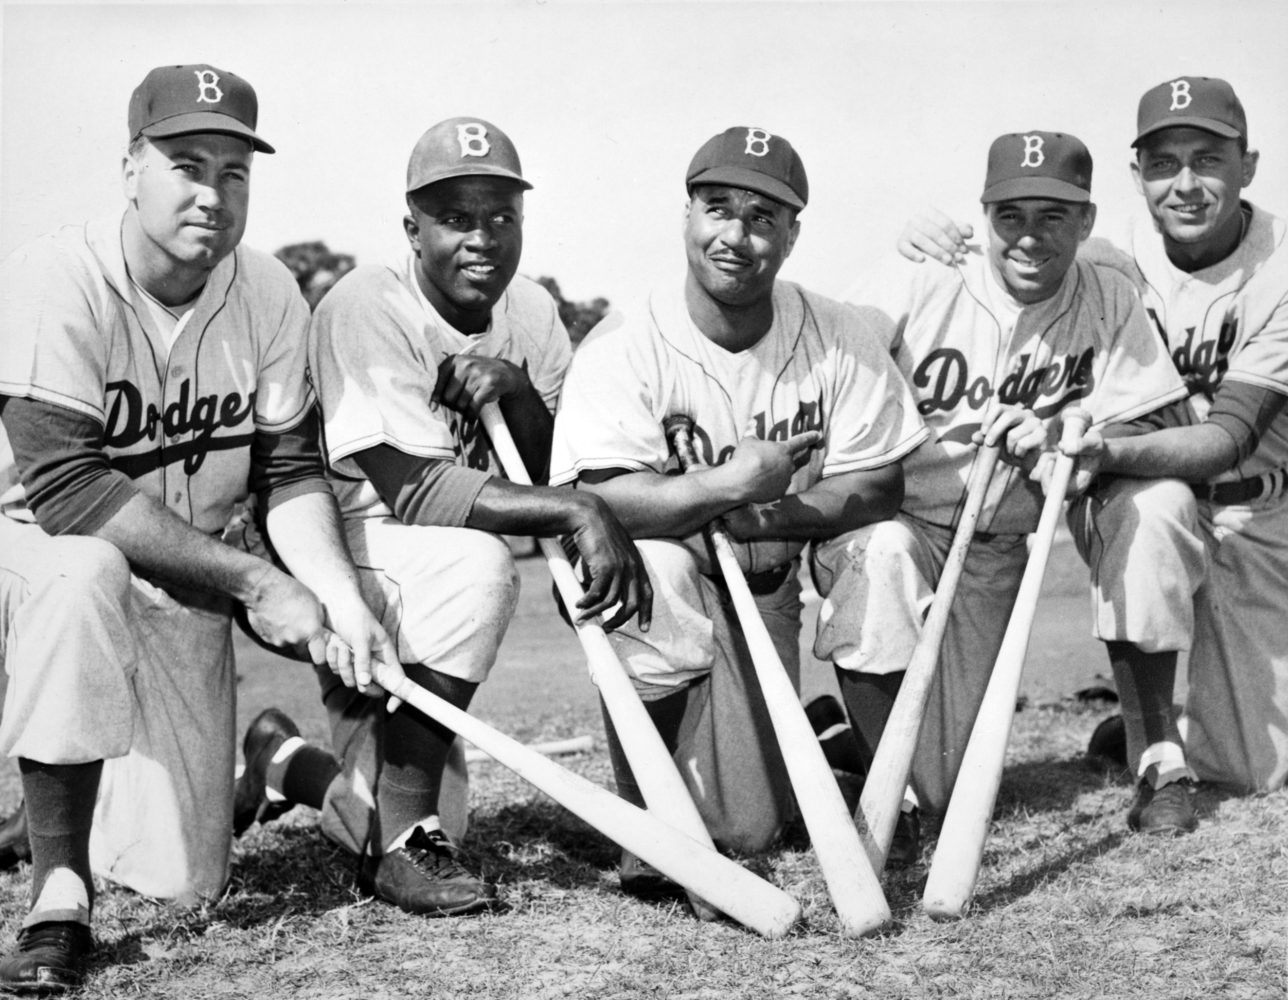 Inaugural Dodgers game in Vero Beach fit for civil rights history book